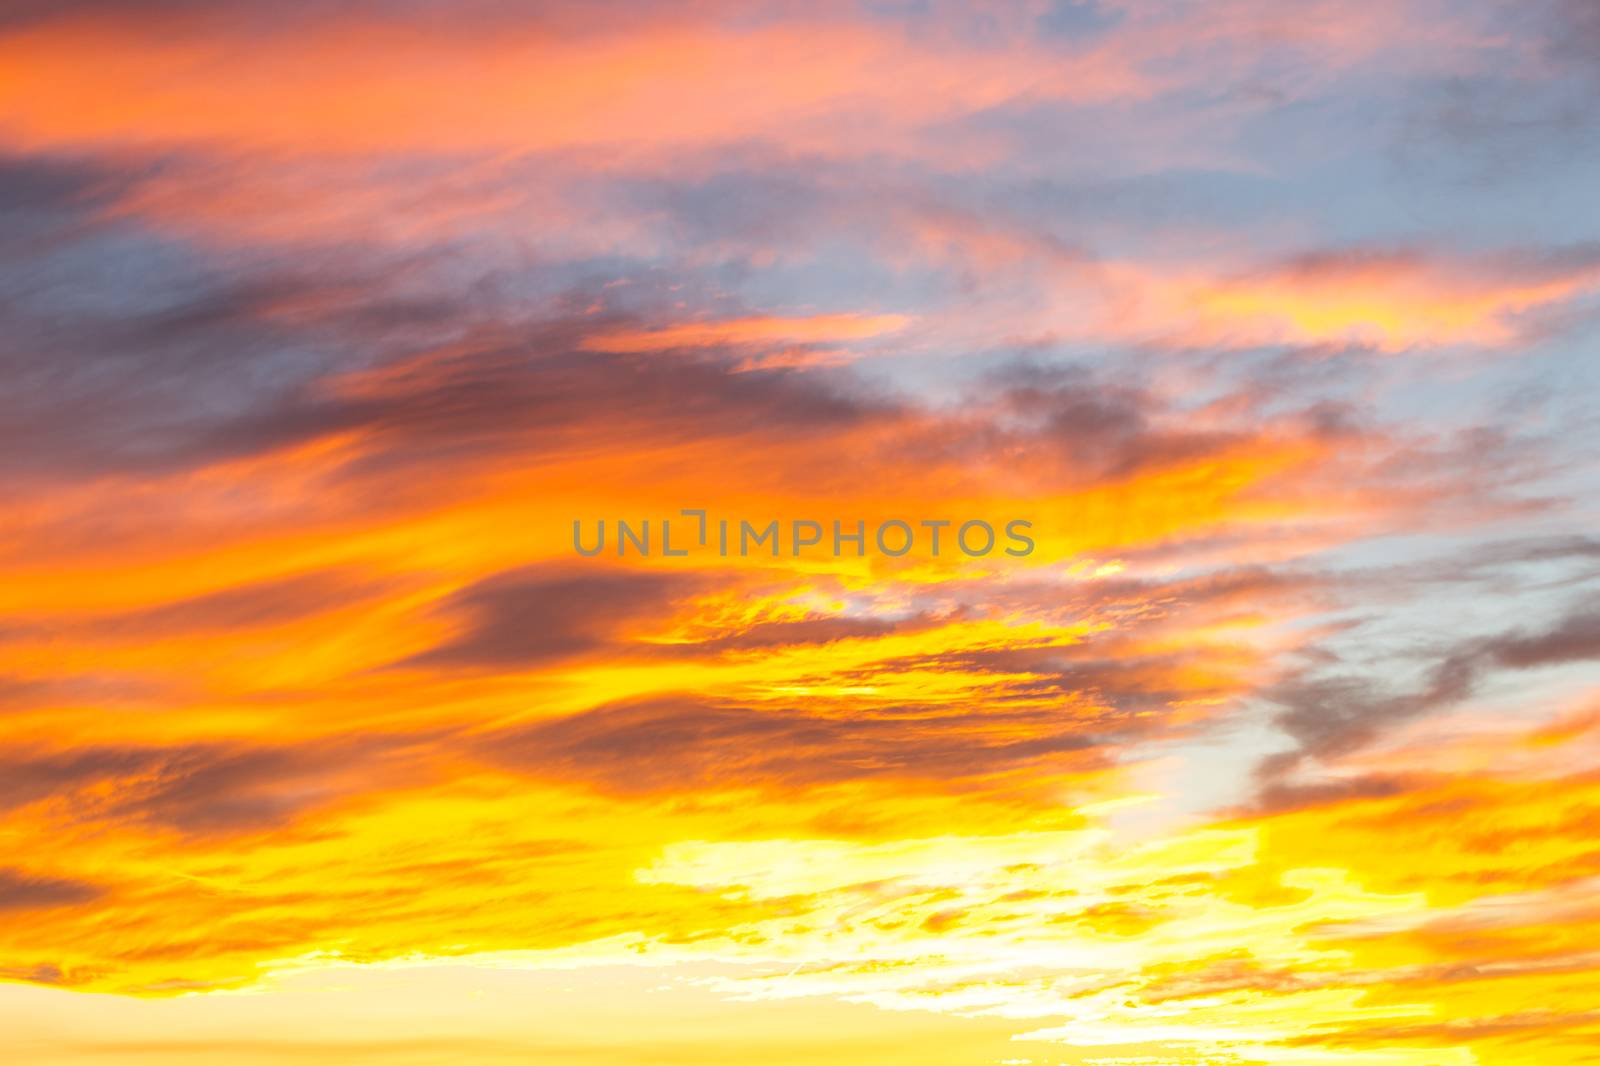 Dramatic yellow and orange colored sunset cloudscape for background or sky replacement photo editing by kb79